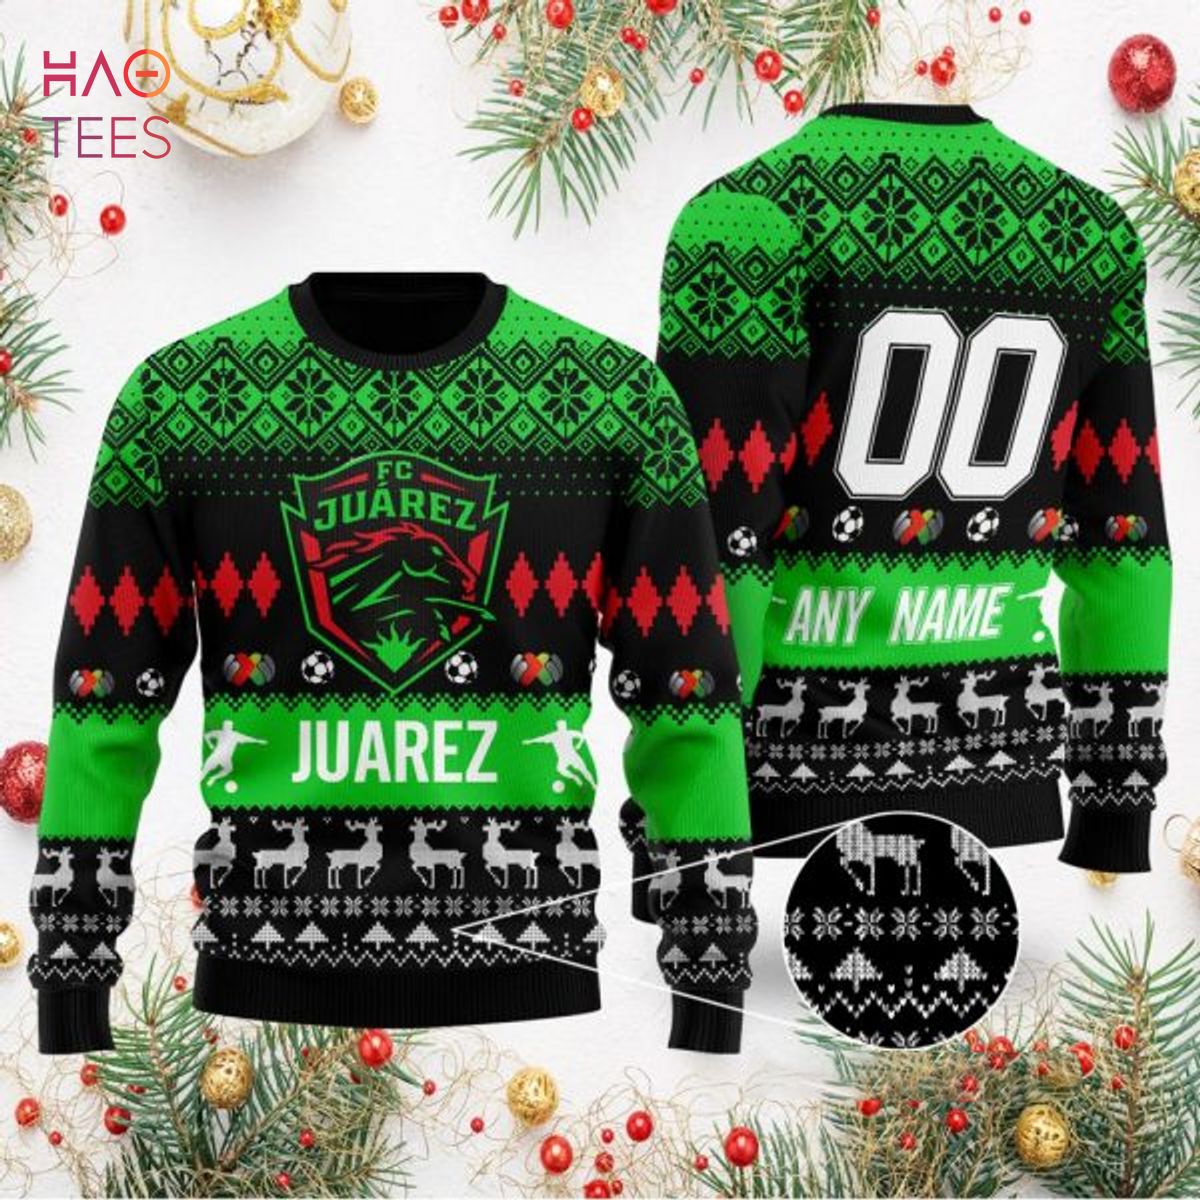 Liga MX FC Junrez Personalized Specialized 2022 Concepts Ugly Sweater